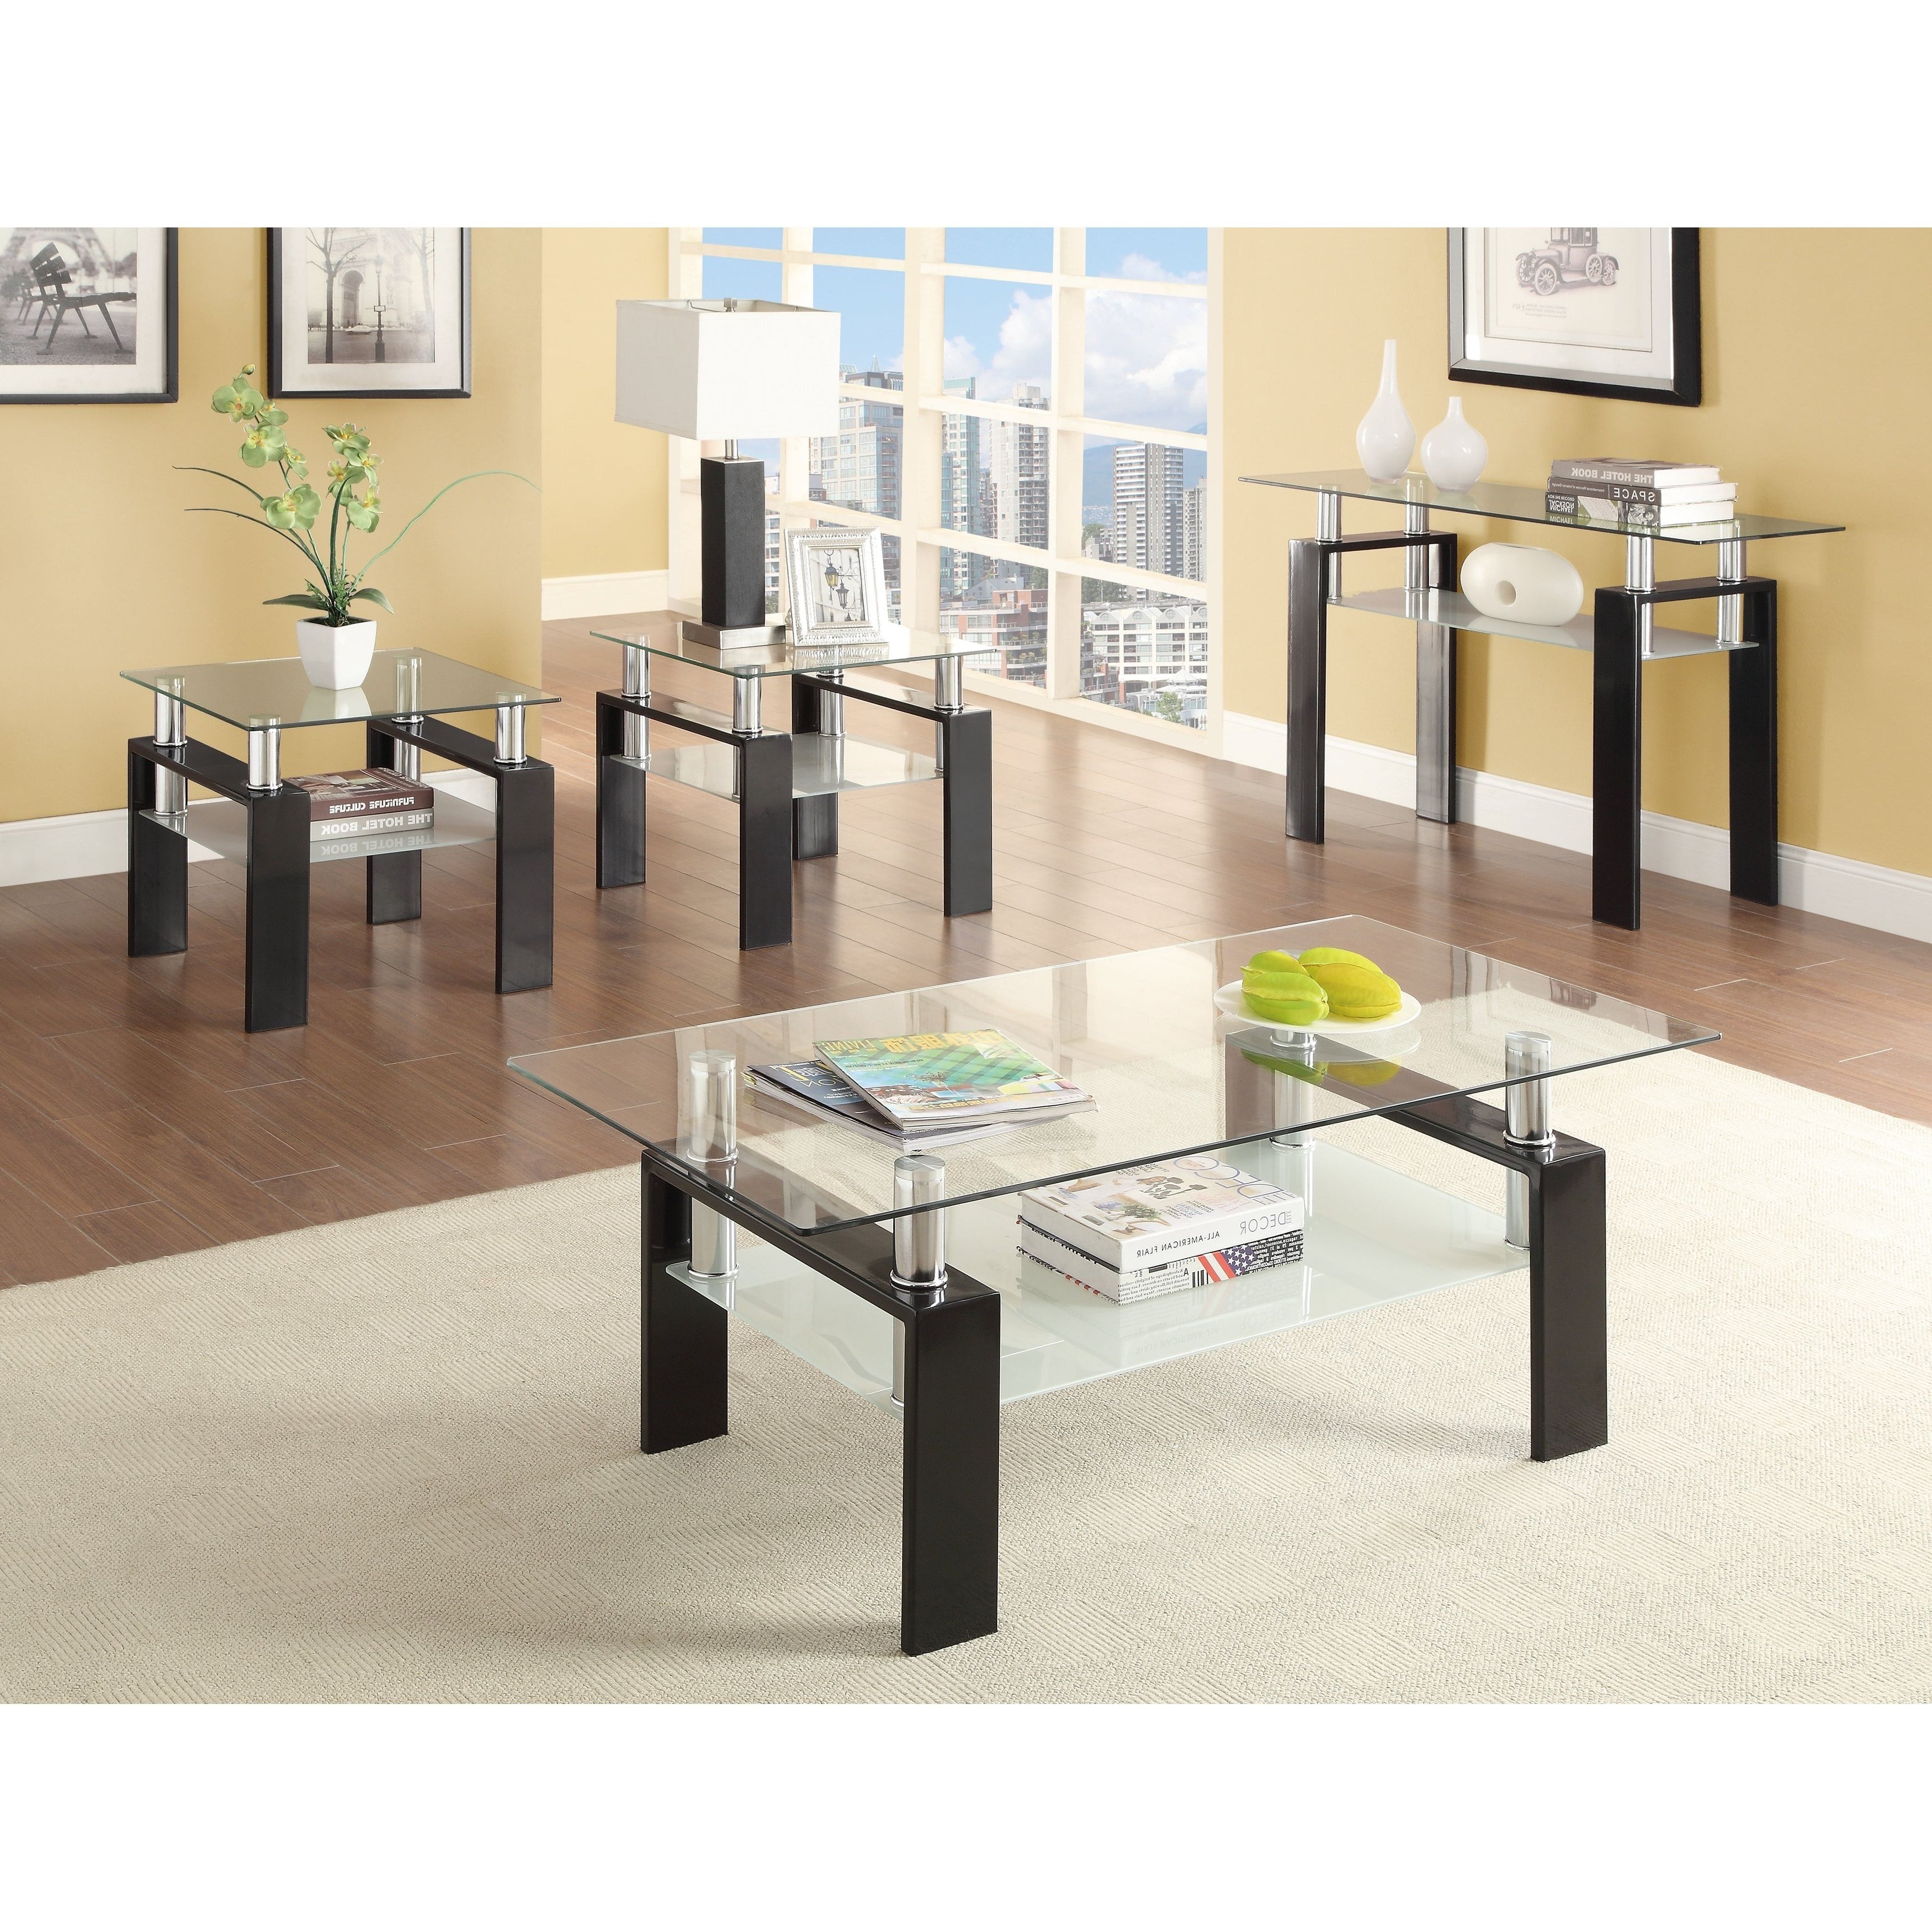 Occasional Contemporary Black Coffee Table Inside Famous Occasional Contemporary Black Coffee Tables (View 1 of 20)